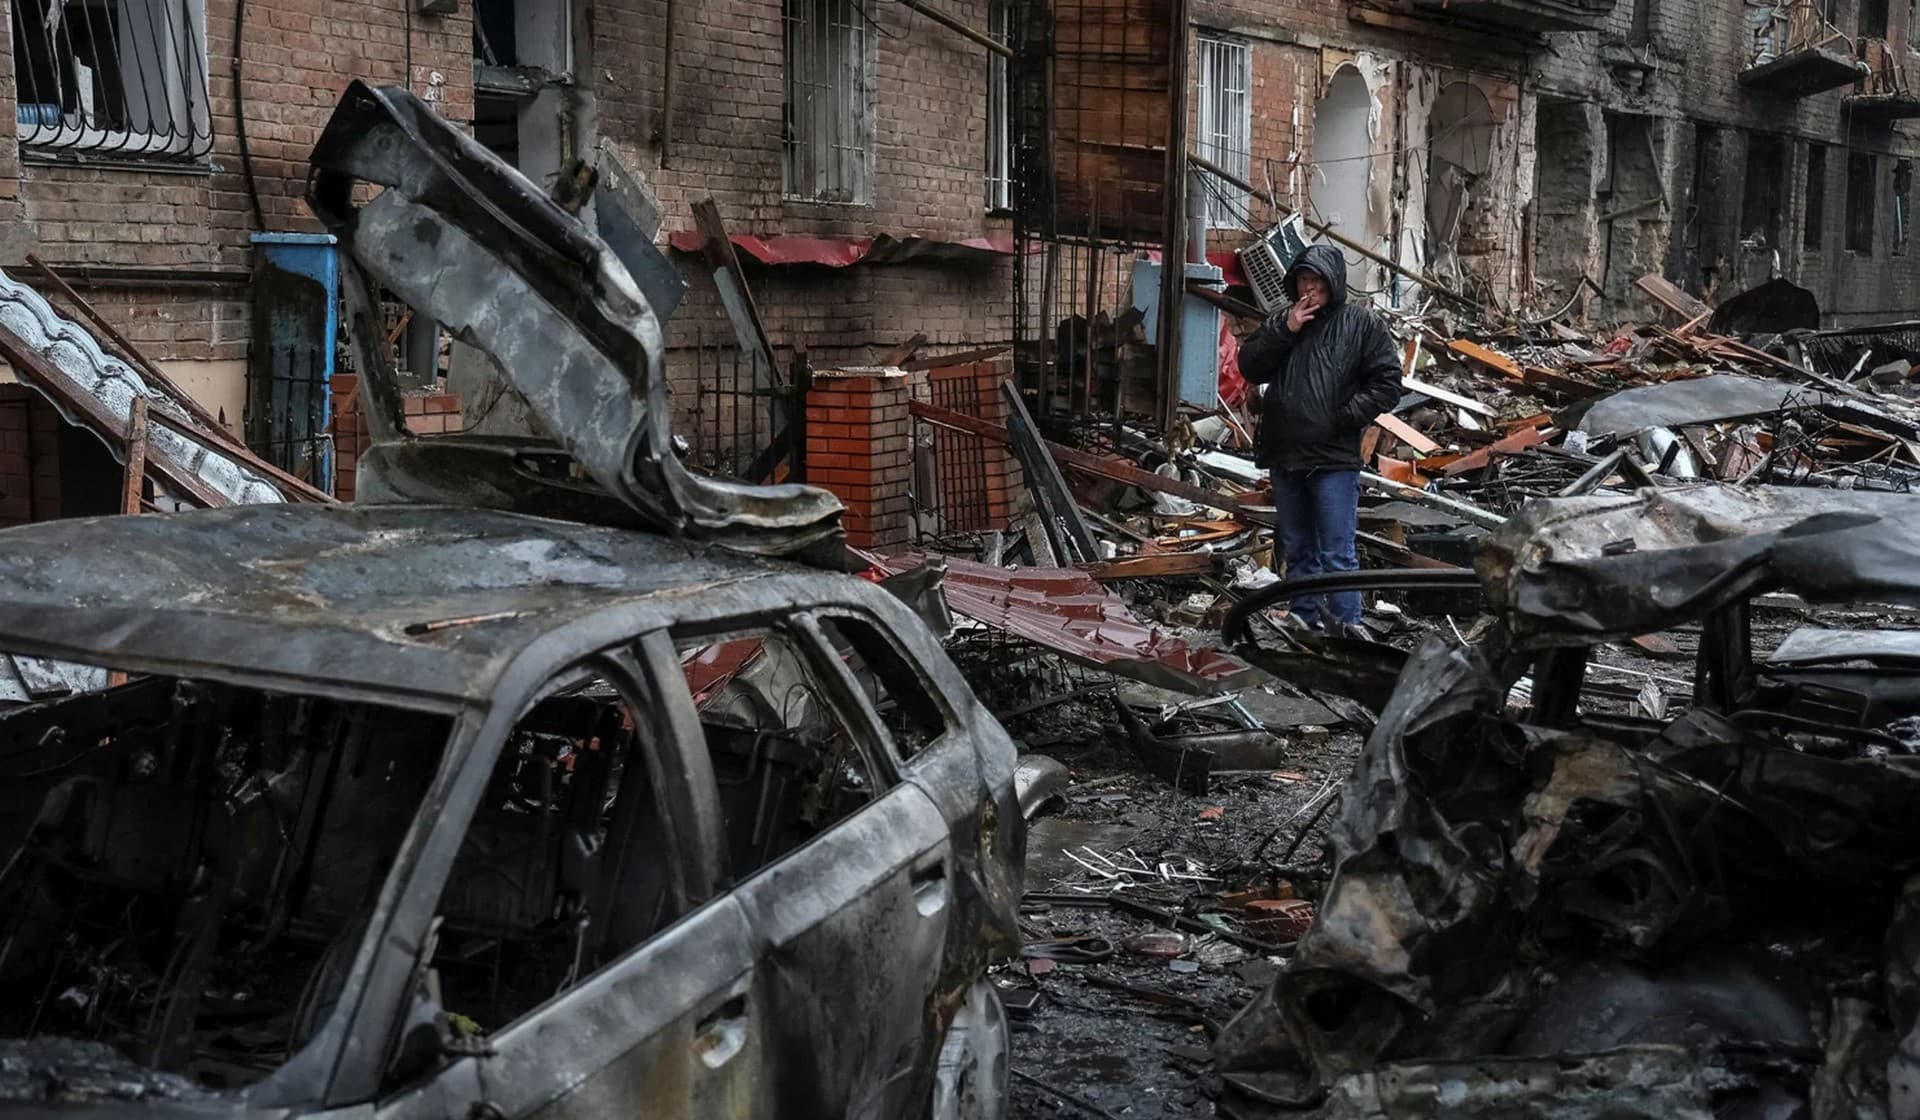 A local resident stands near his residential building destroyed by a Russian missile attack in the town of Vyshhorod